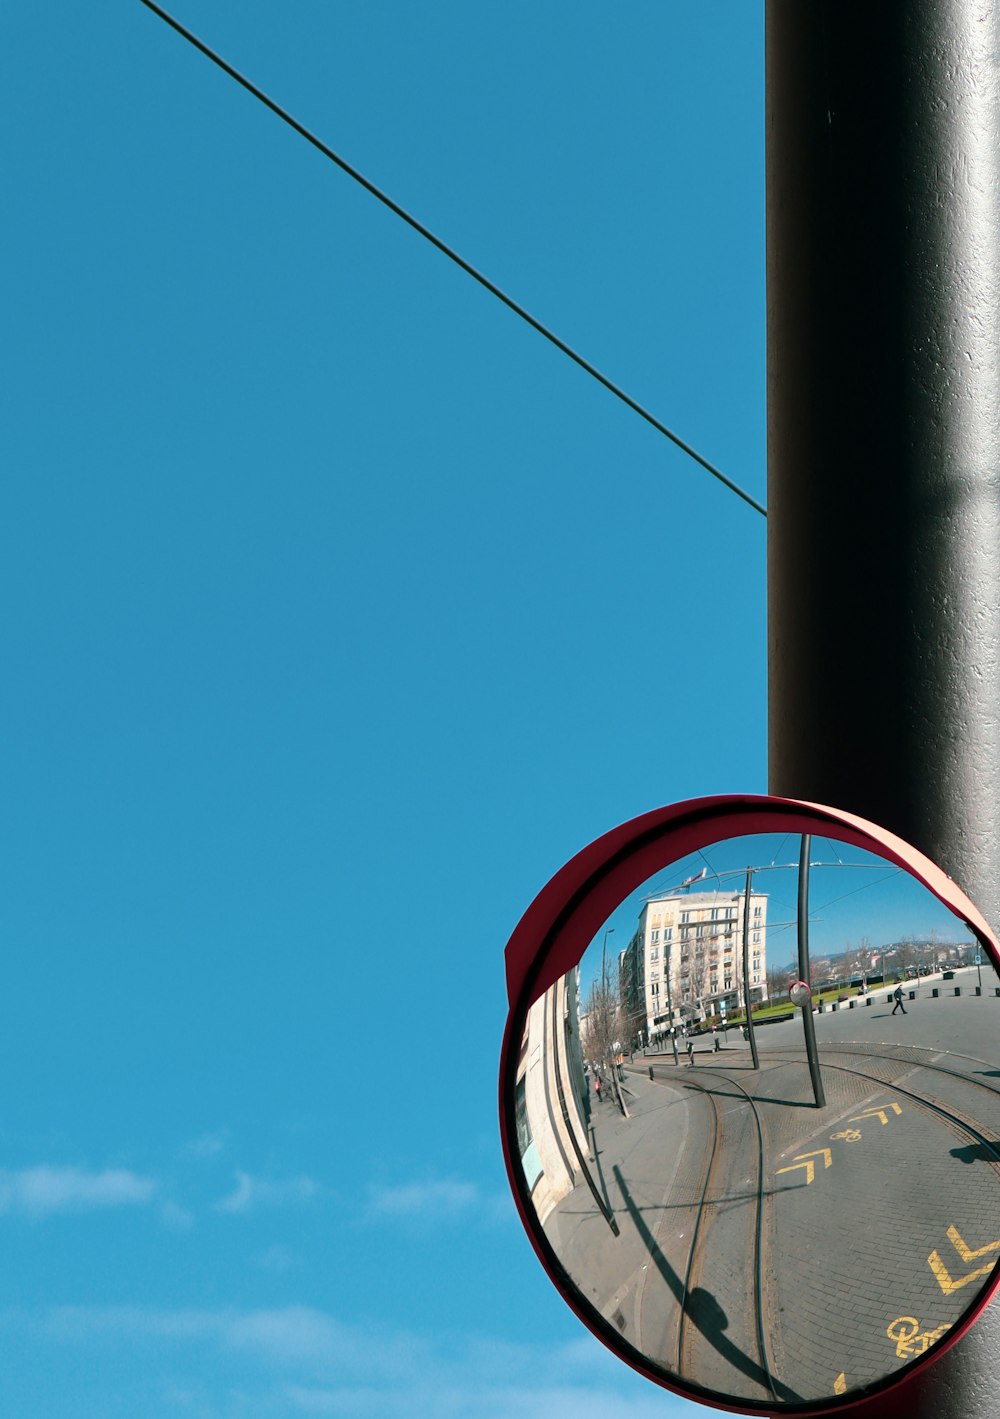 a side view mirror on a pole on a street